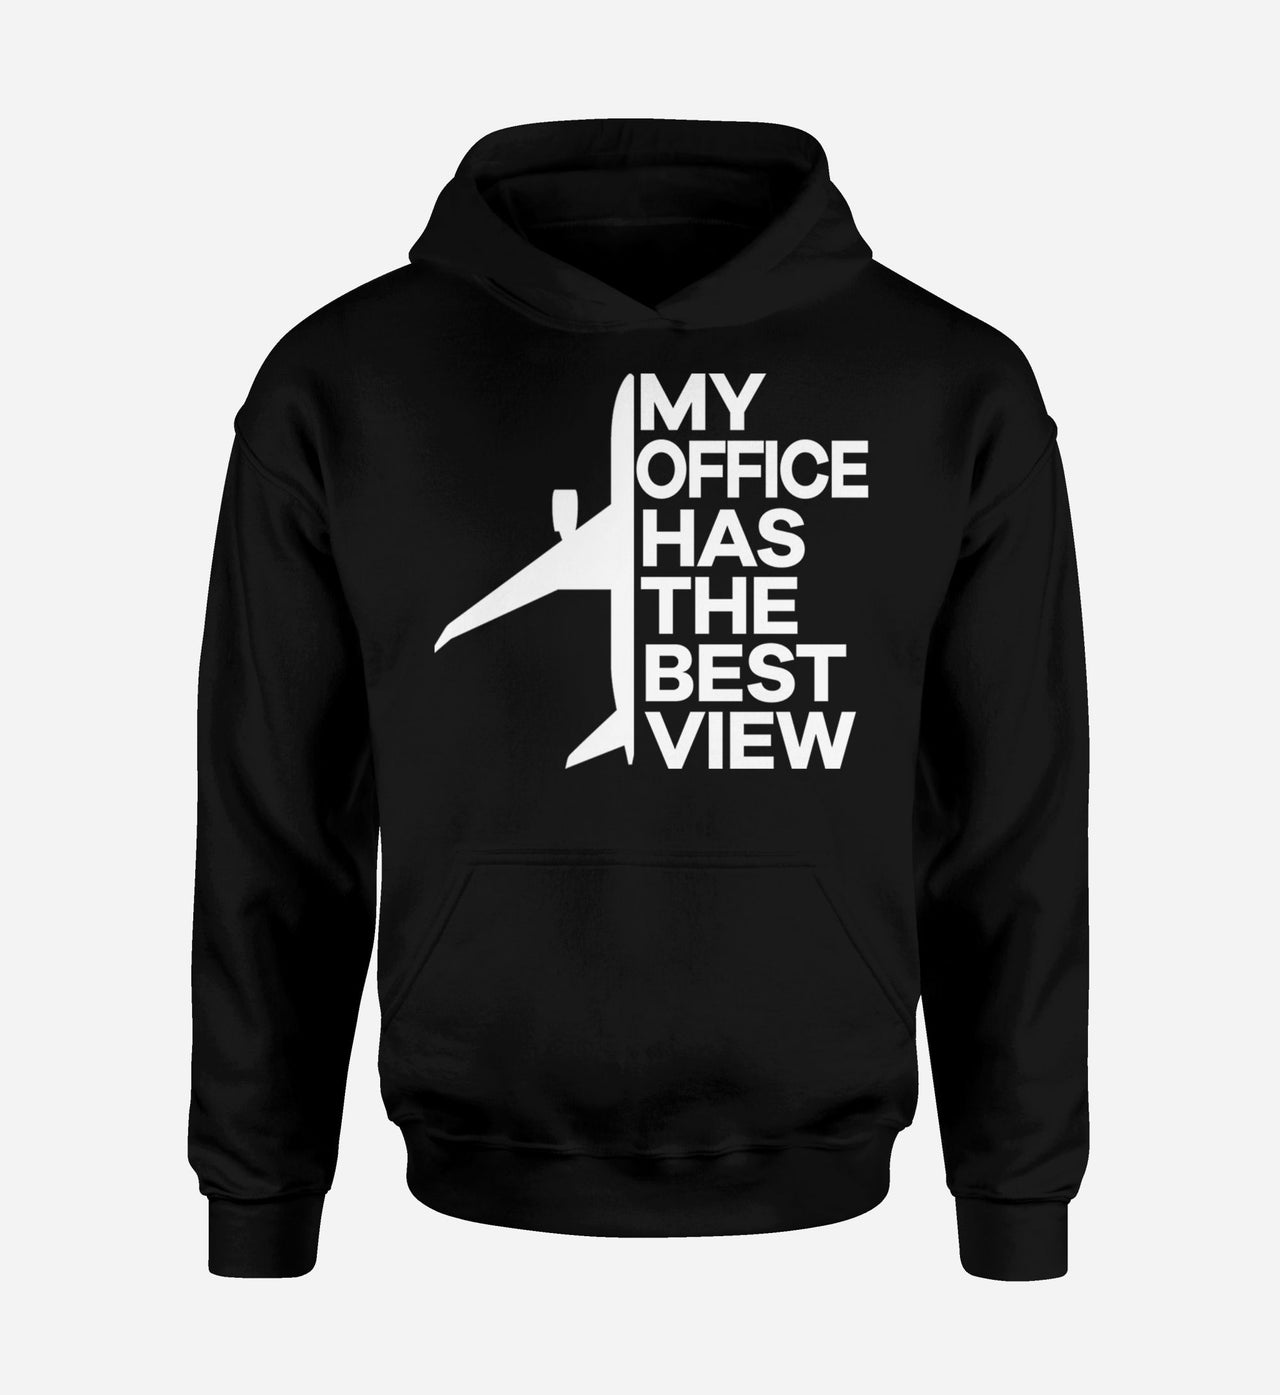 My Office Has The Best View Designed Hoodies